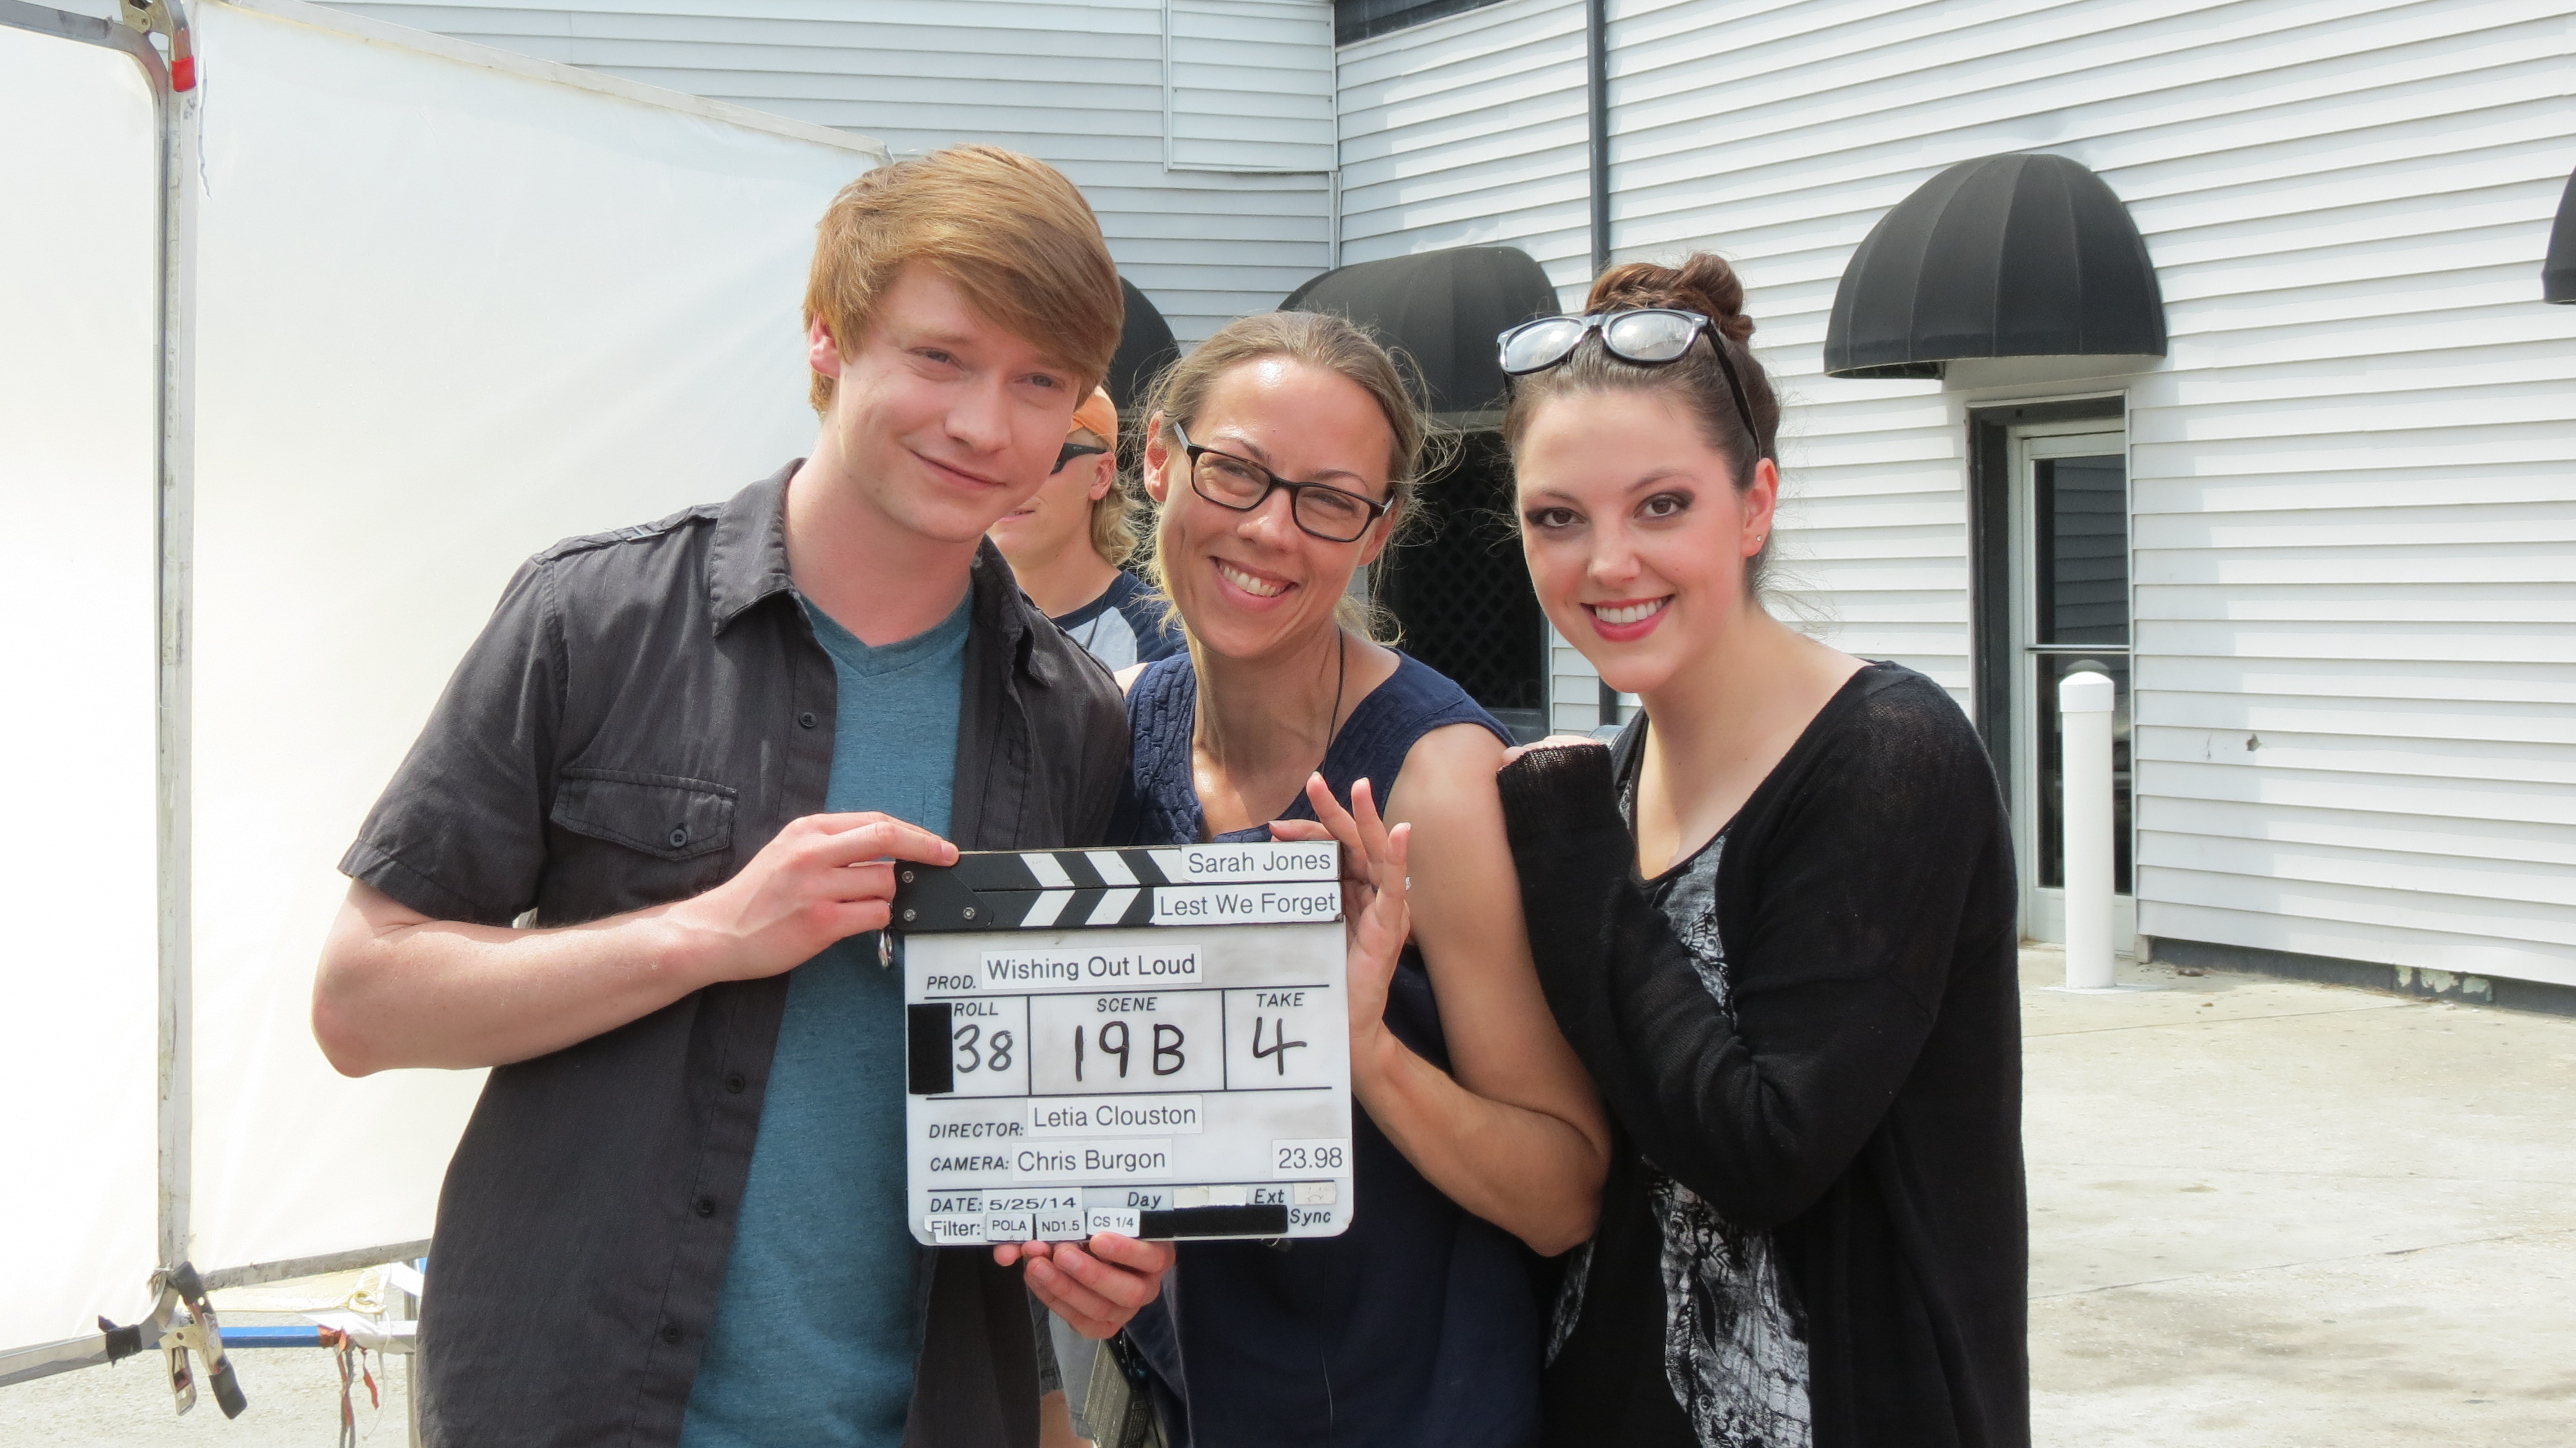 All She Wishes with Calum Worthy, Letia Clouston, and Lexi Giovagnoli